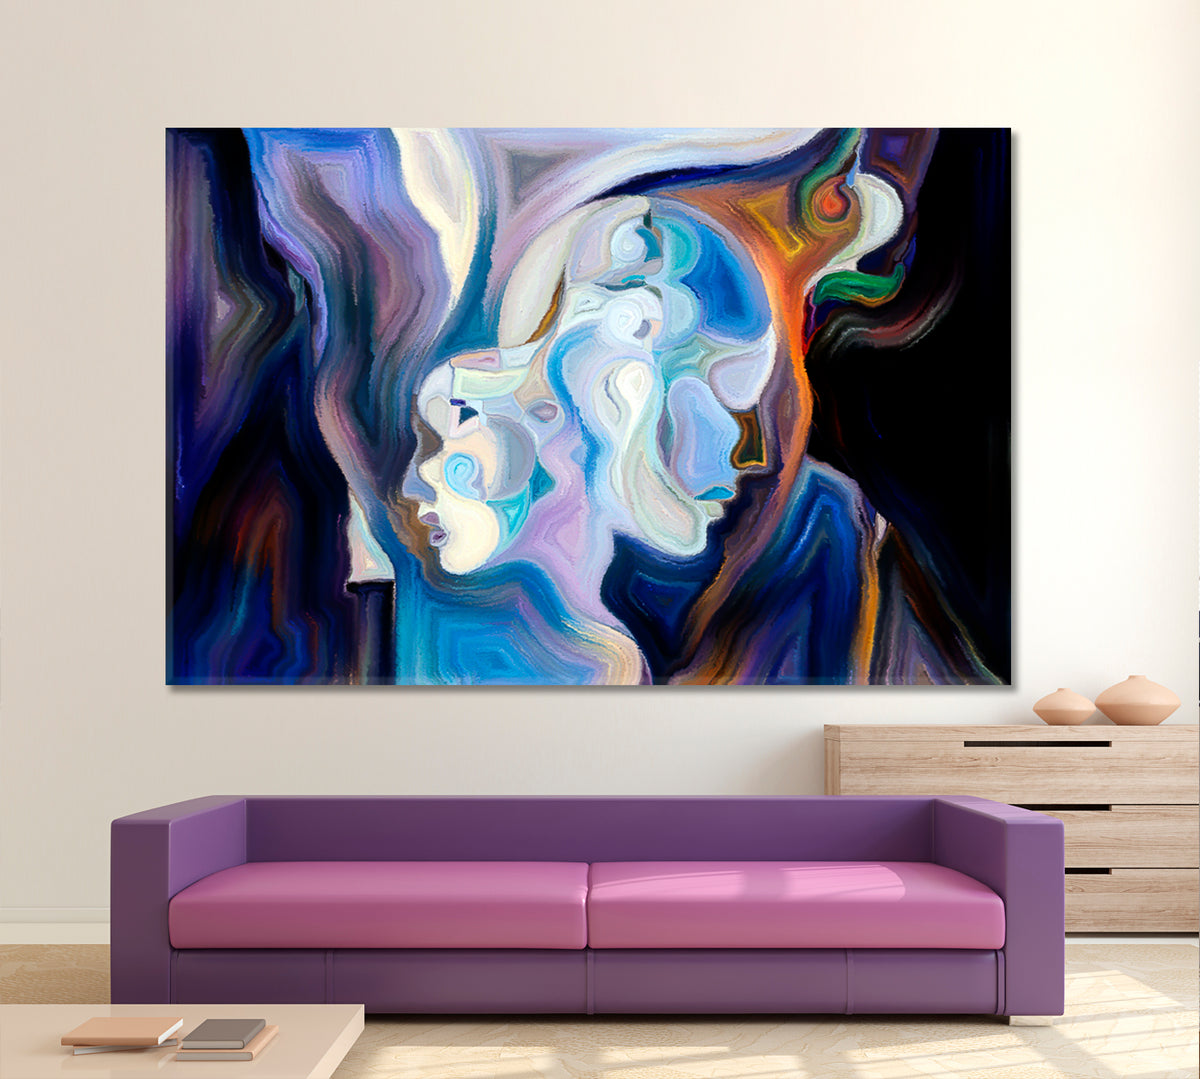 Soul World Love Relationship Nature All In Colors Abstract Design Contemporary Art Artesty 1 panel 24" x 16" 